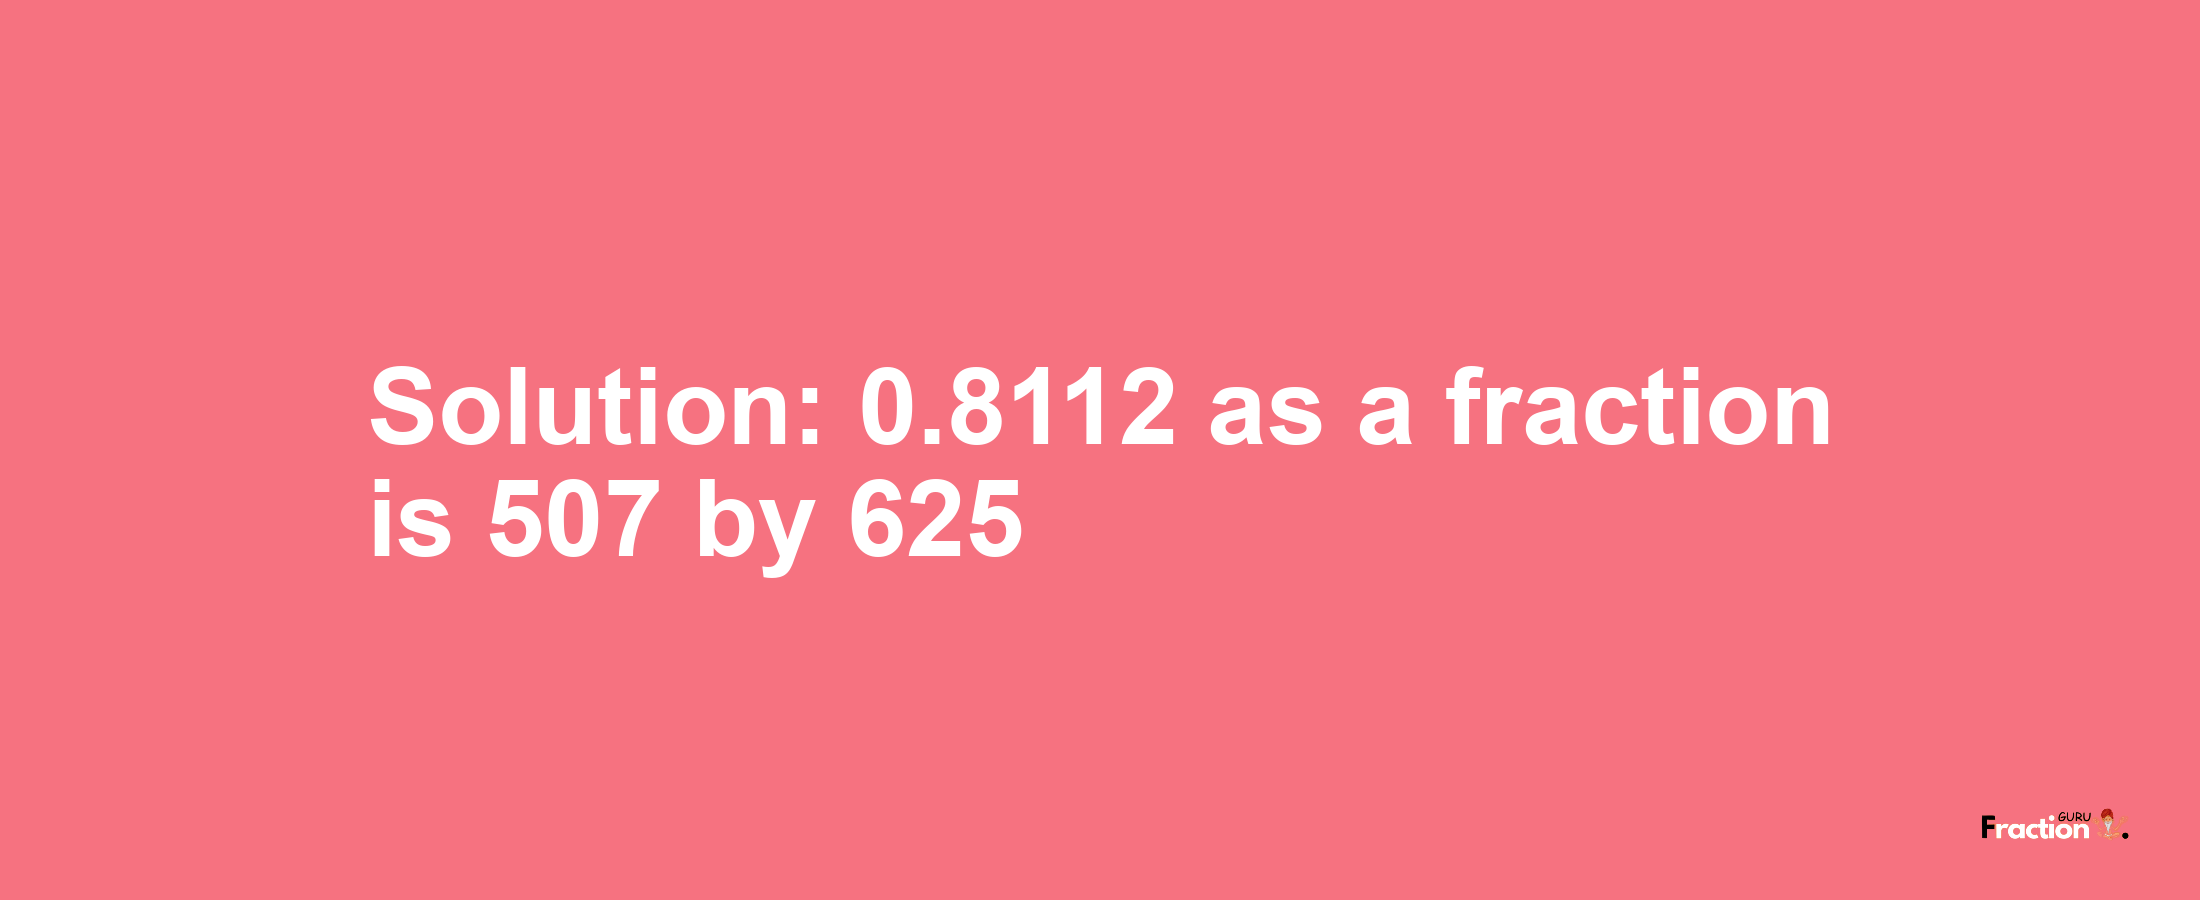 Solution:0.8112 as a fraction is 507/625